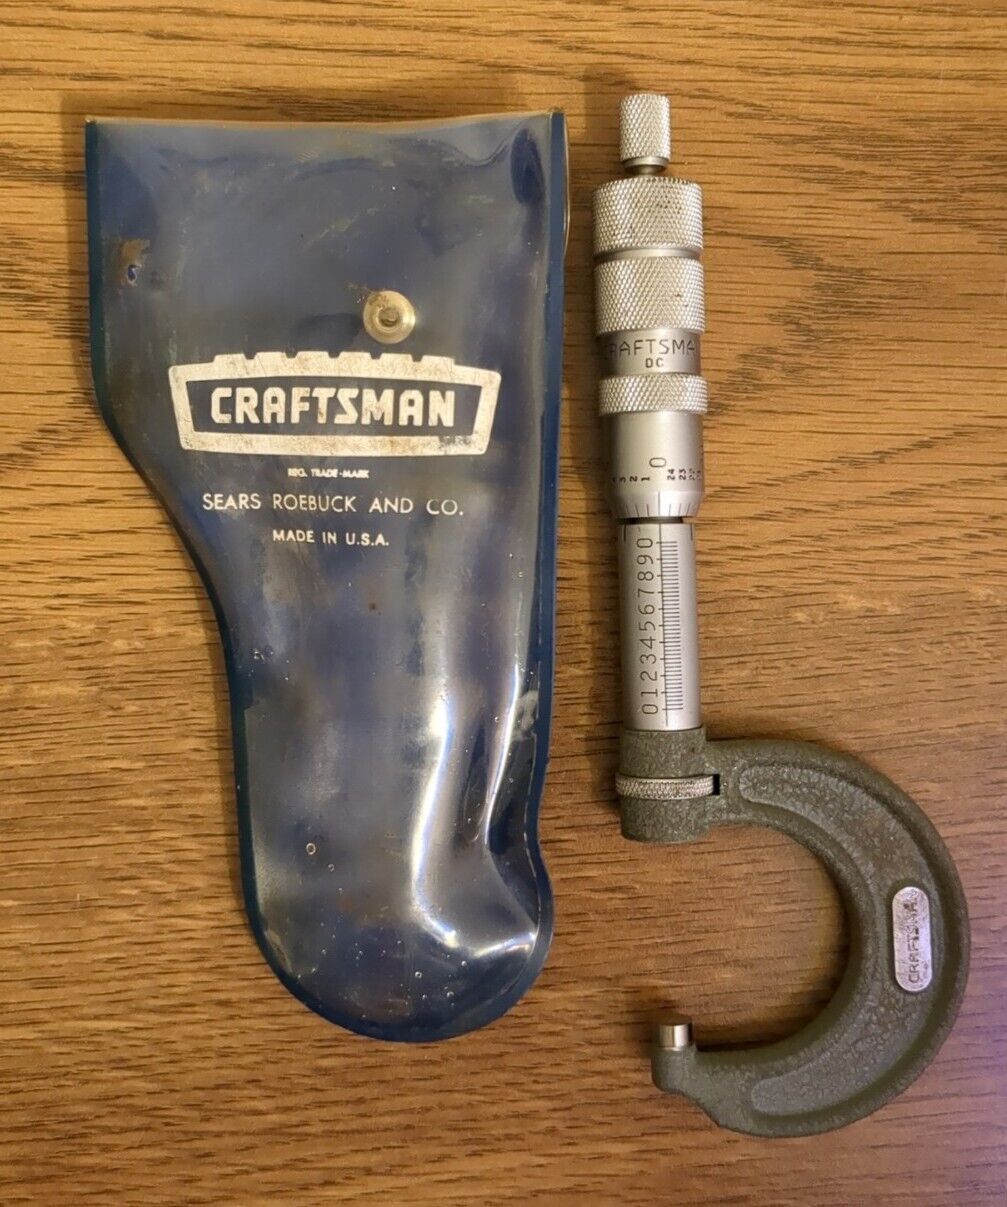 Craftsman Vintage Micrometer Outside 0-1 Inch USA Made Tool With Case 